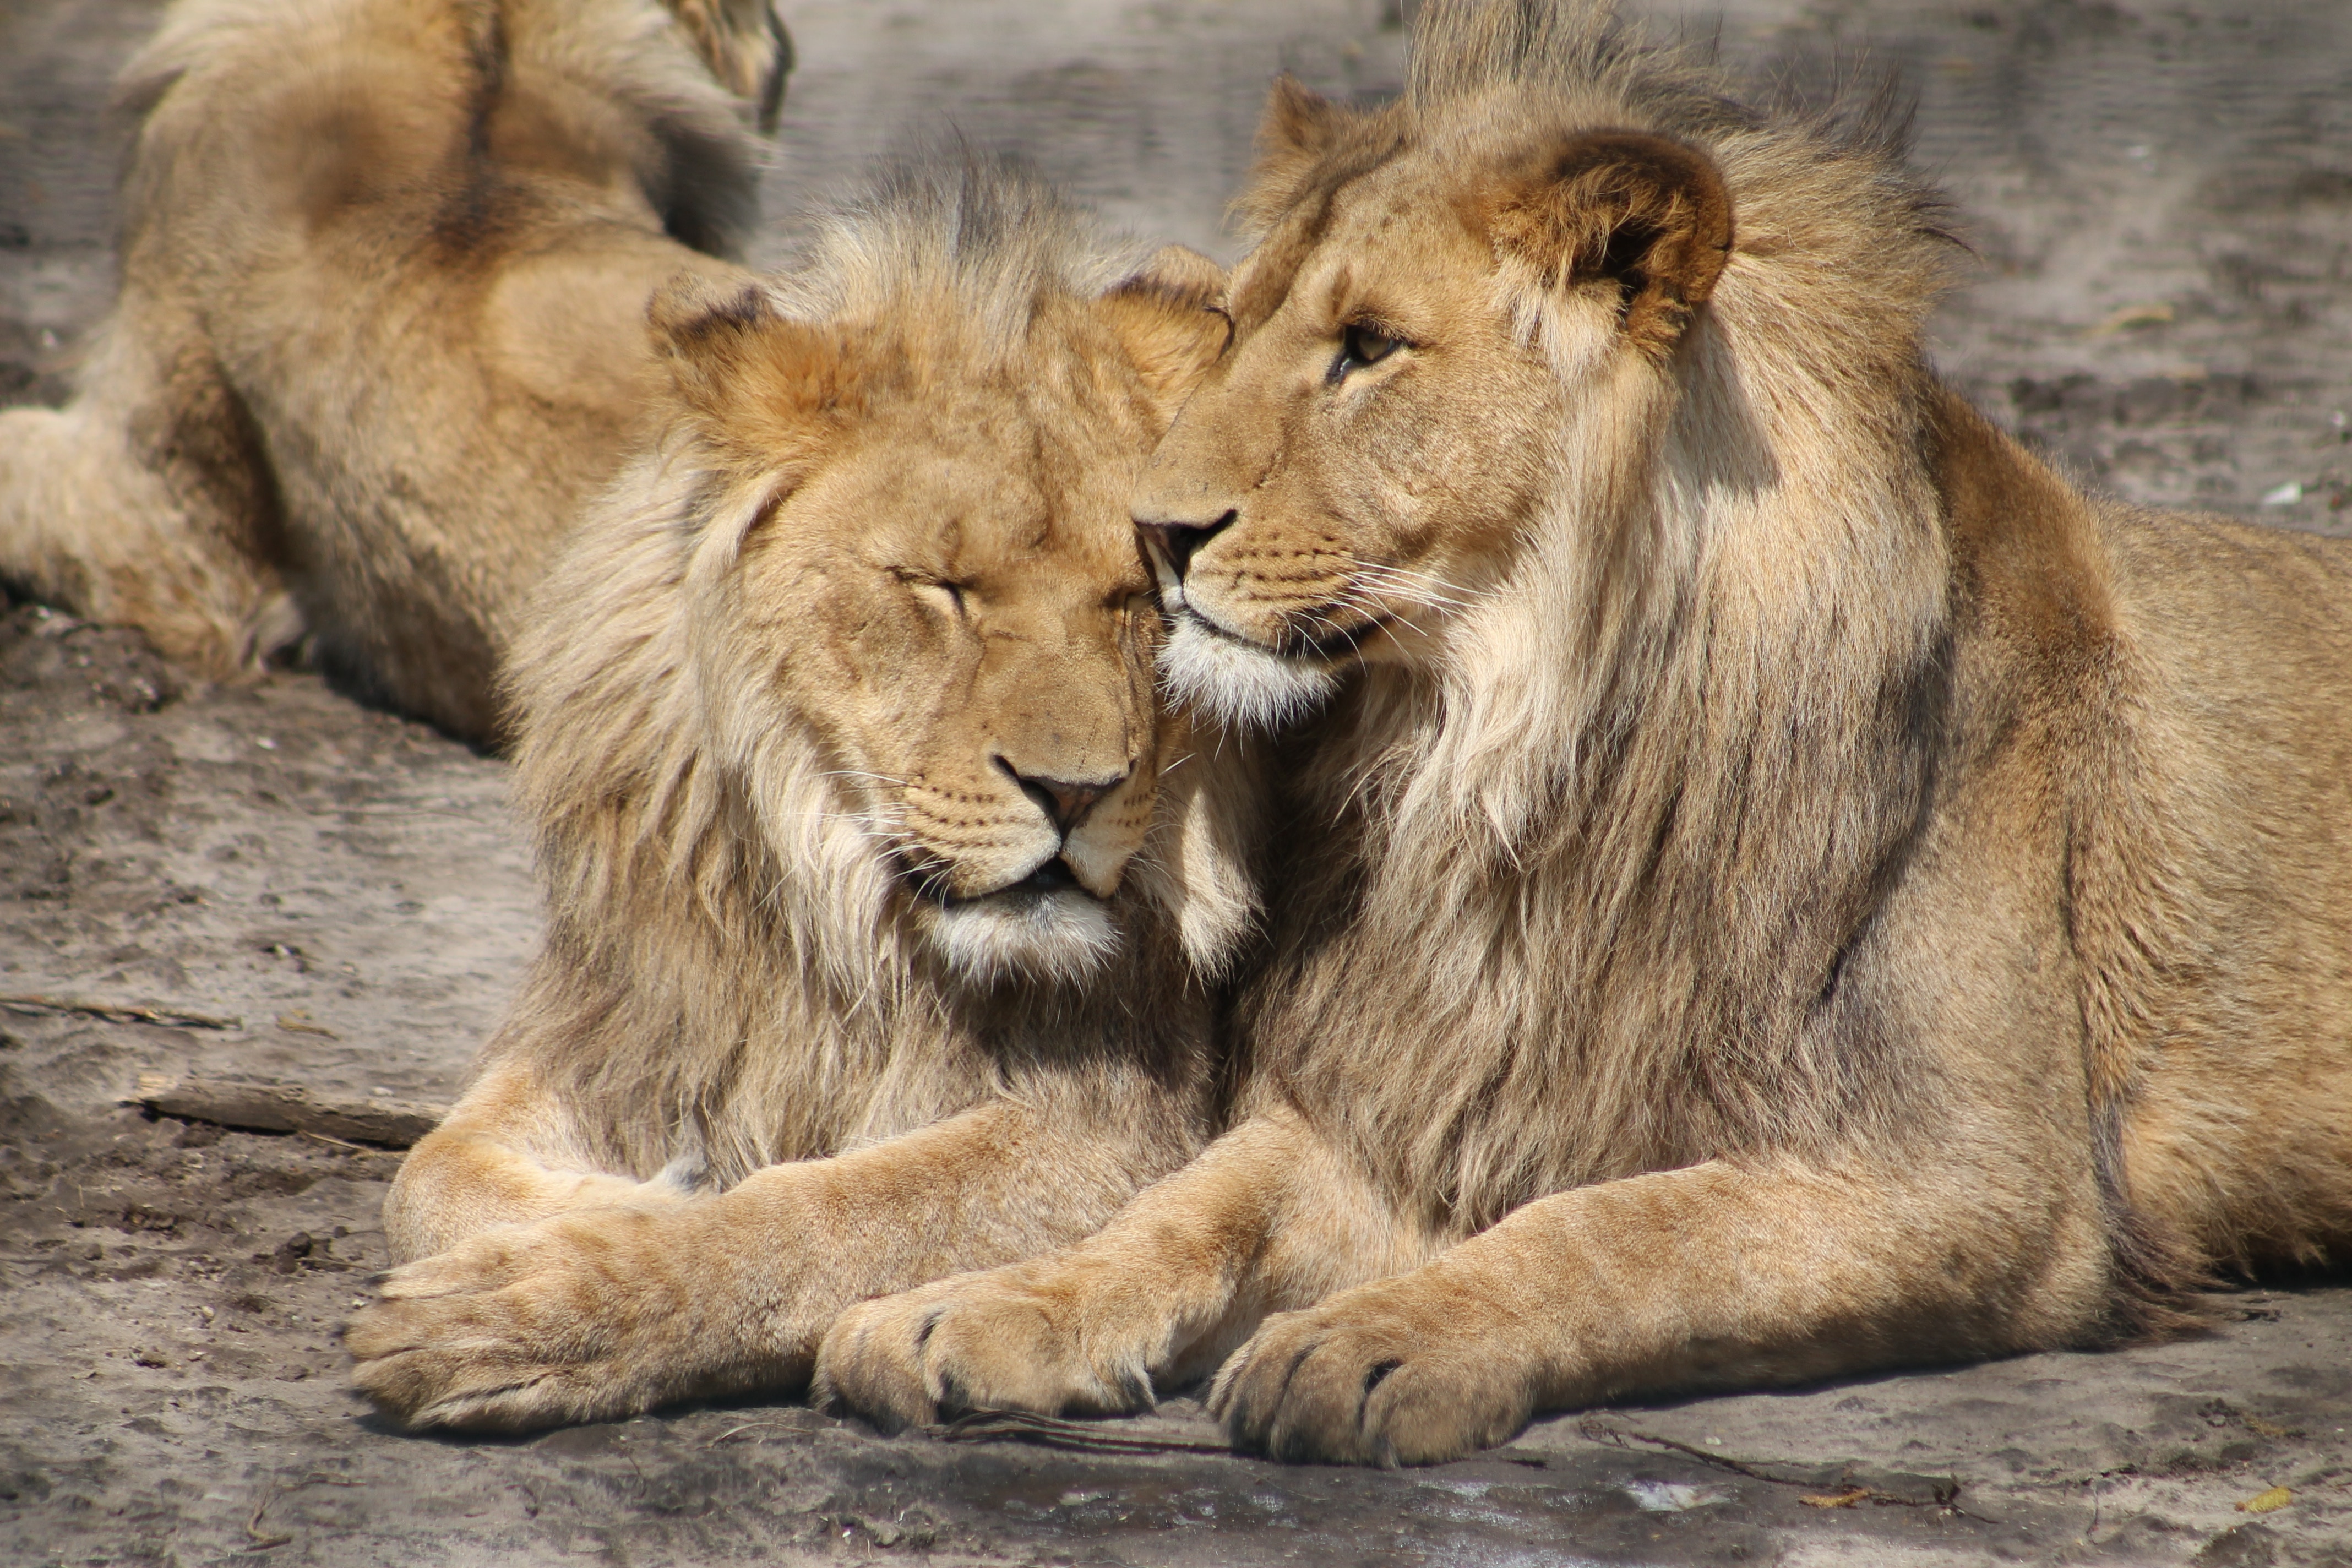 Two lions snuggling